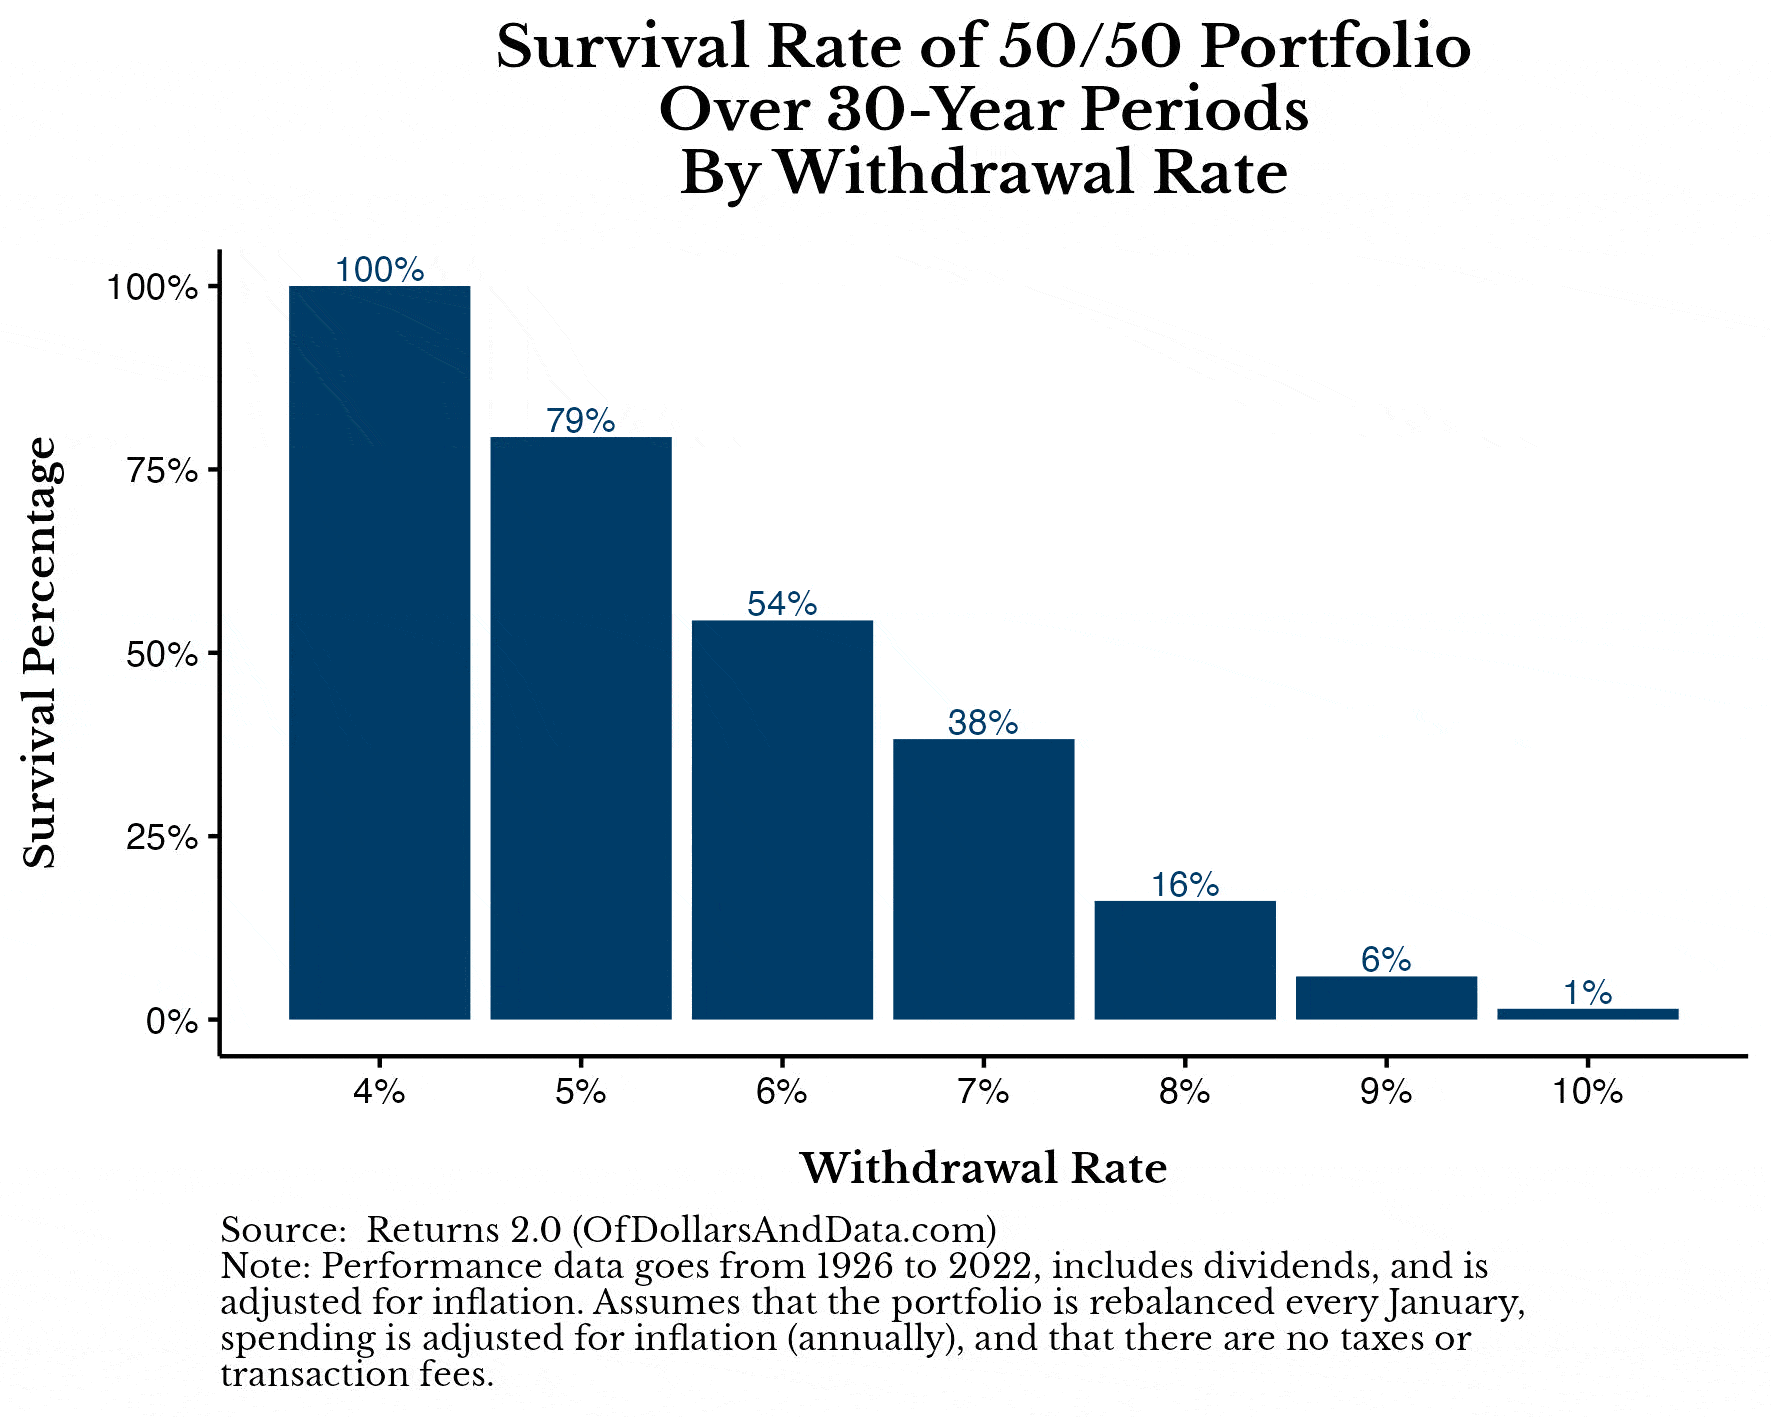 GIF showing the safe withdrawal rate simulation results for a 50/50 to 100/0 portfolio from 1926-2022.